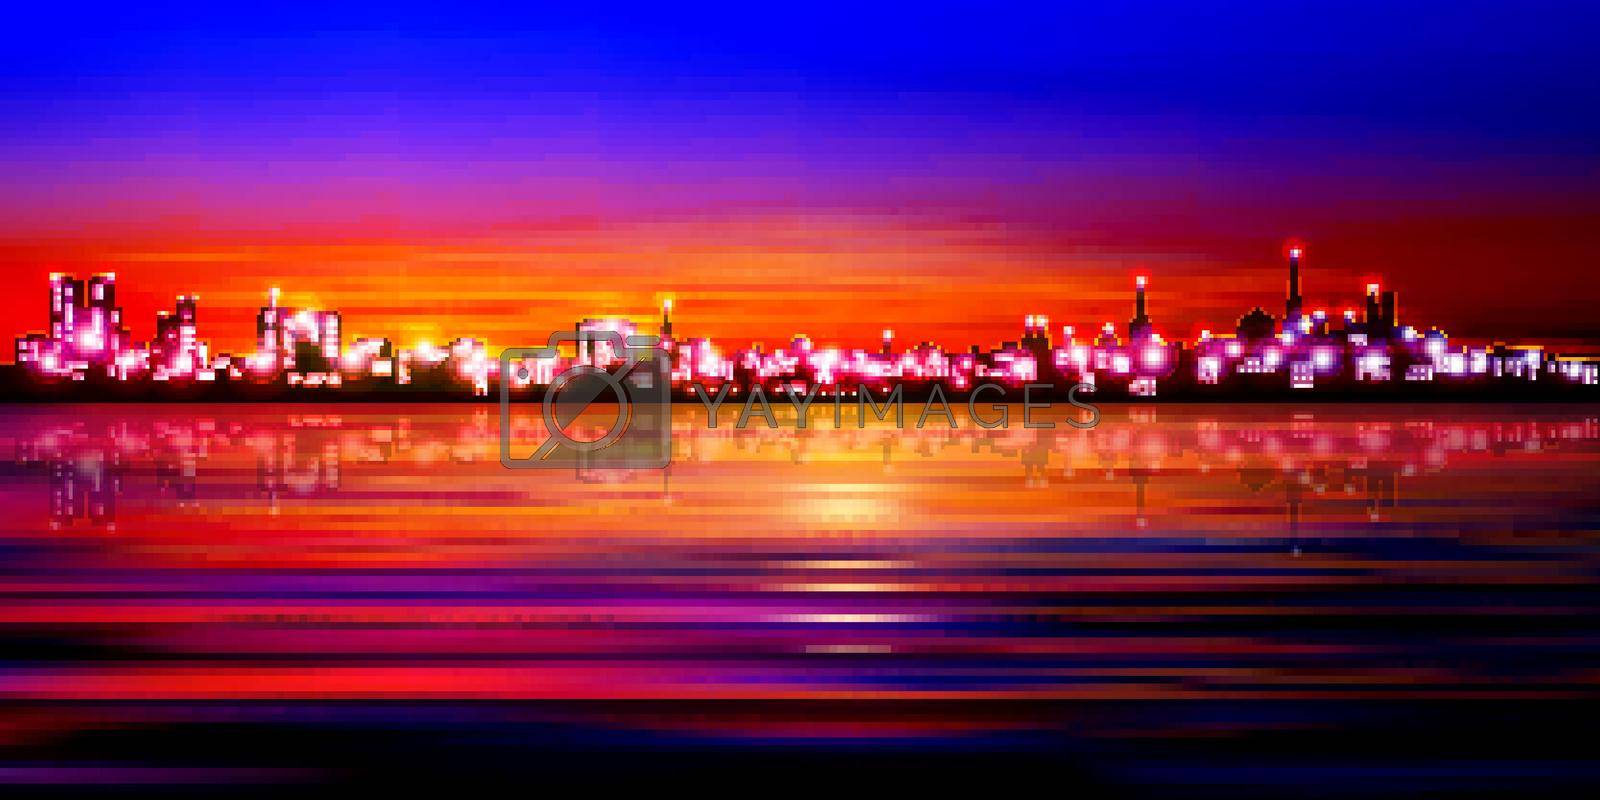 Royalty free image of abstract background with silhouette of city by lem